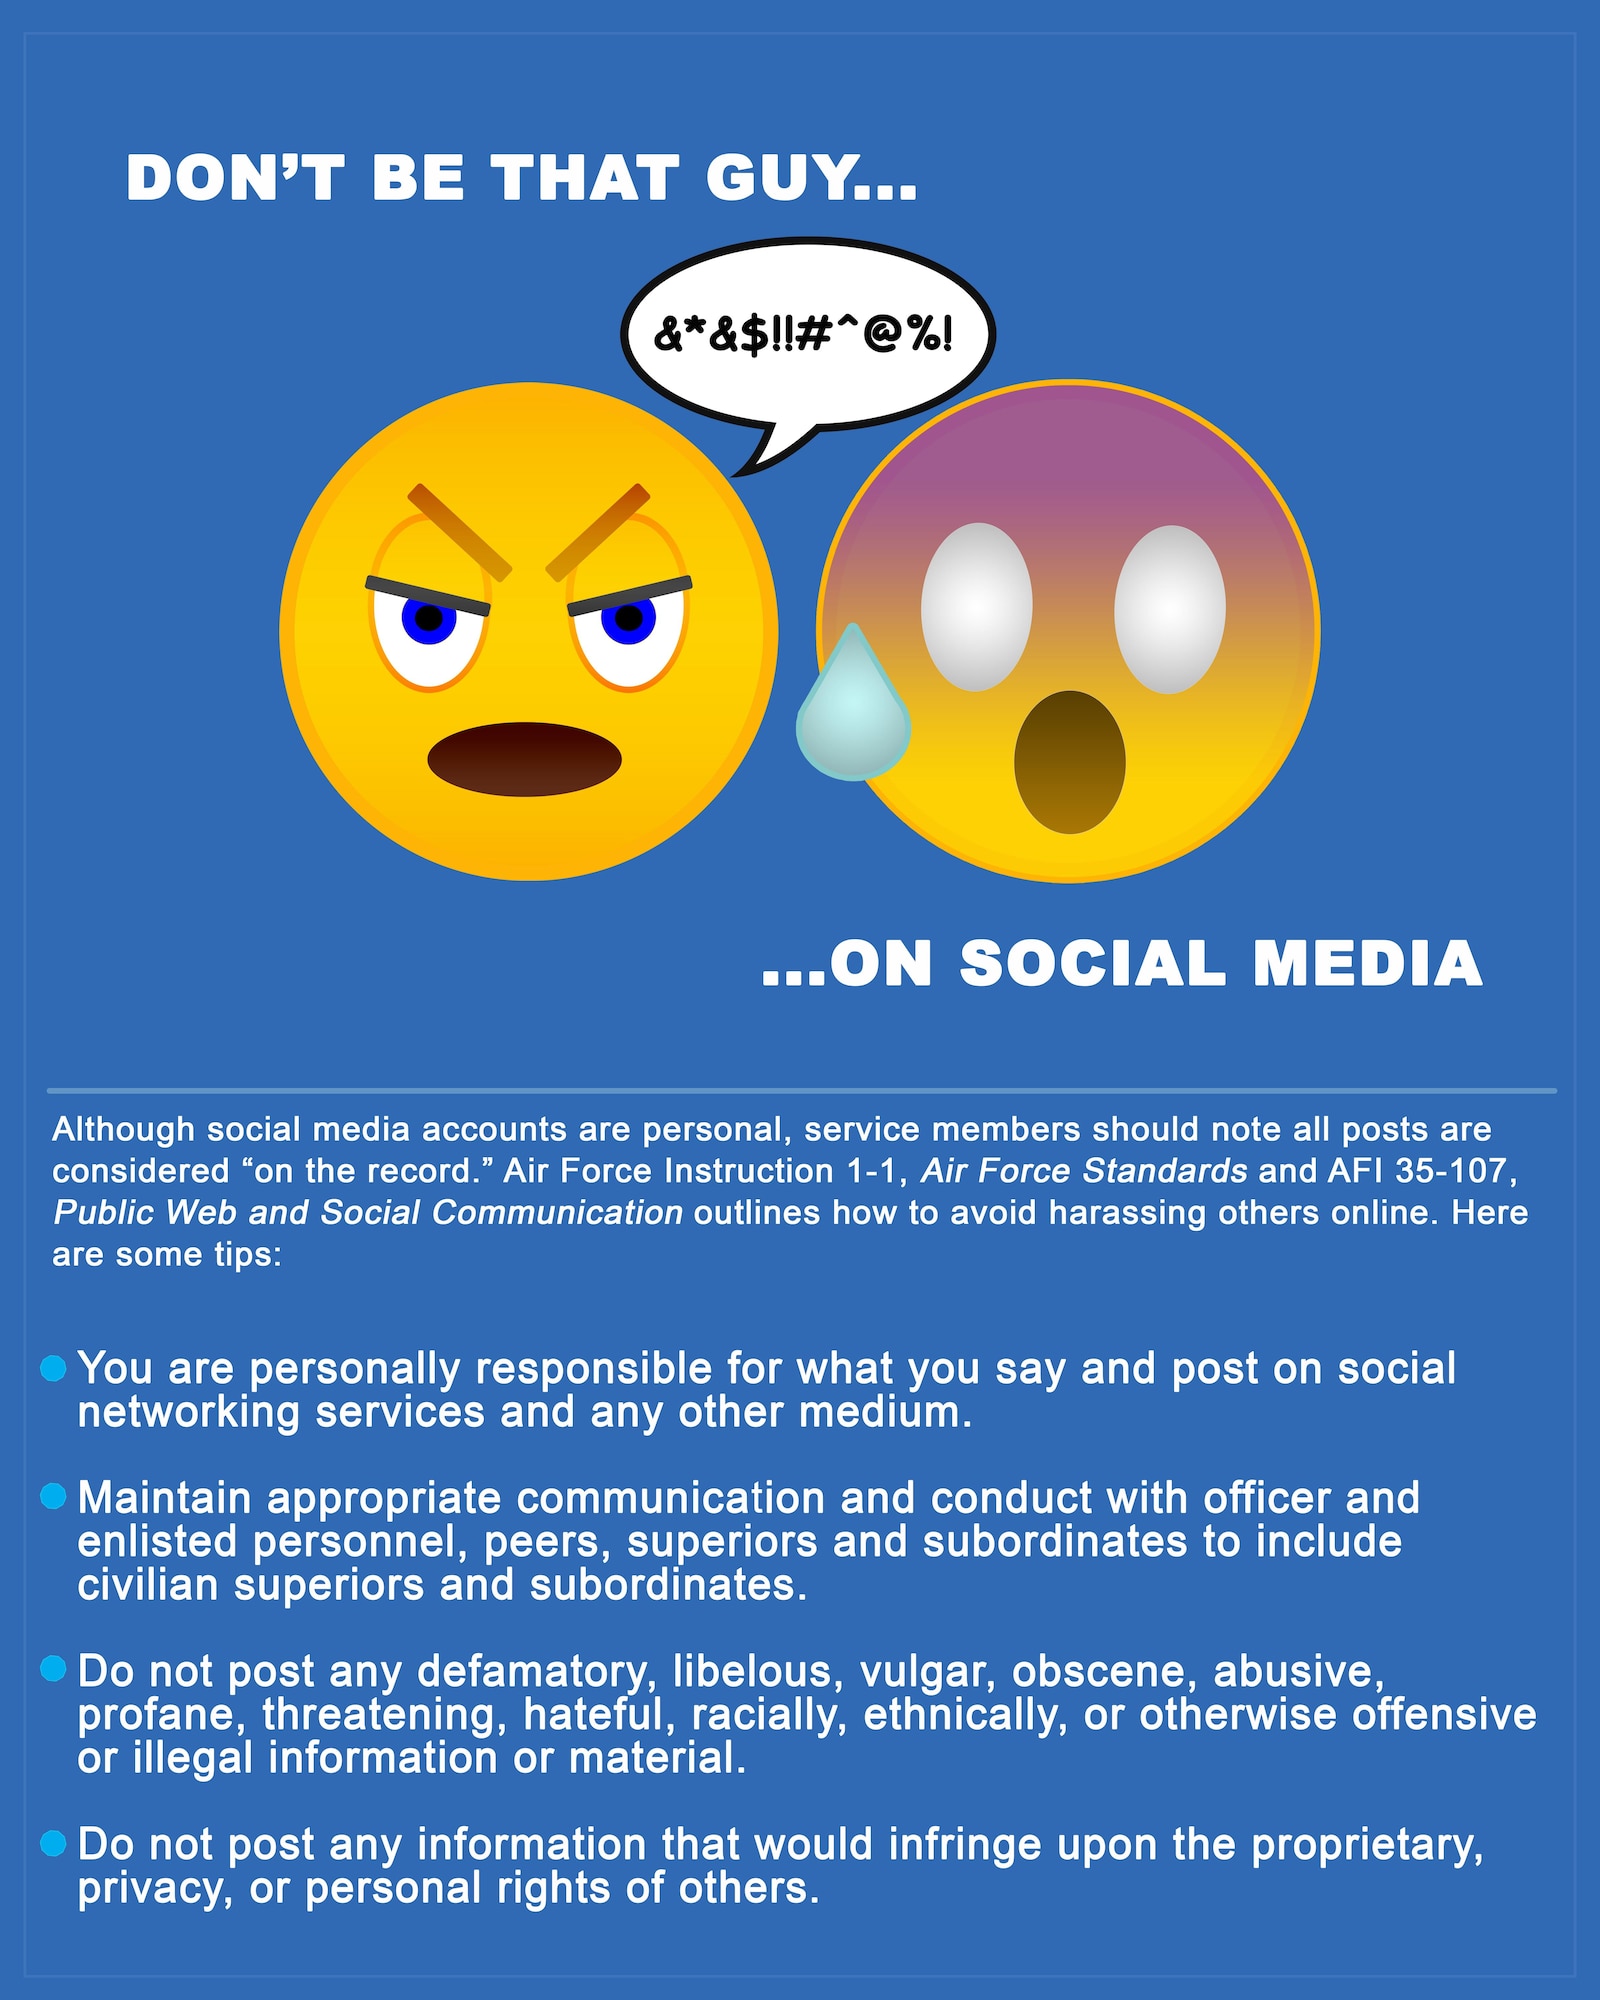 Although social media accounts are personal, service members should note all social media posts are considered “on the record.” Without time to “think it through”, users risk hurting their career and others with defamatory comments or by overstepping their boundaries when sending private messages. (U.S. Air Force graphic/Staff Areca T. Bell)